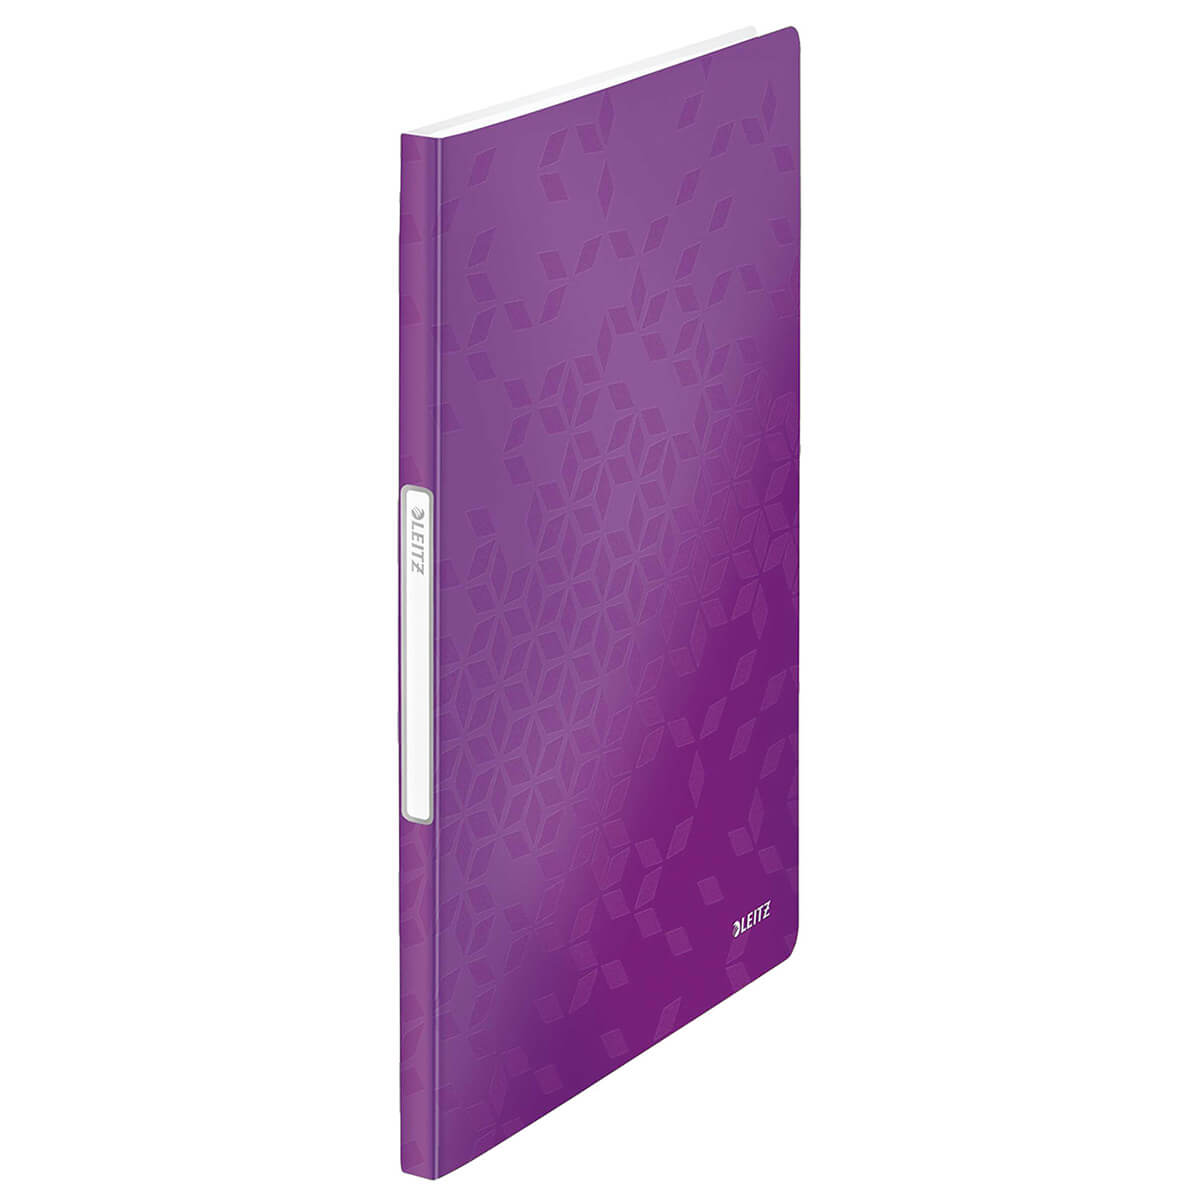 Leitz View book wow a4 pp 20 covers purple